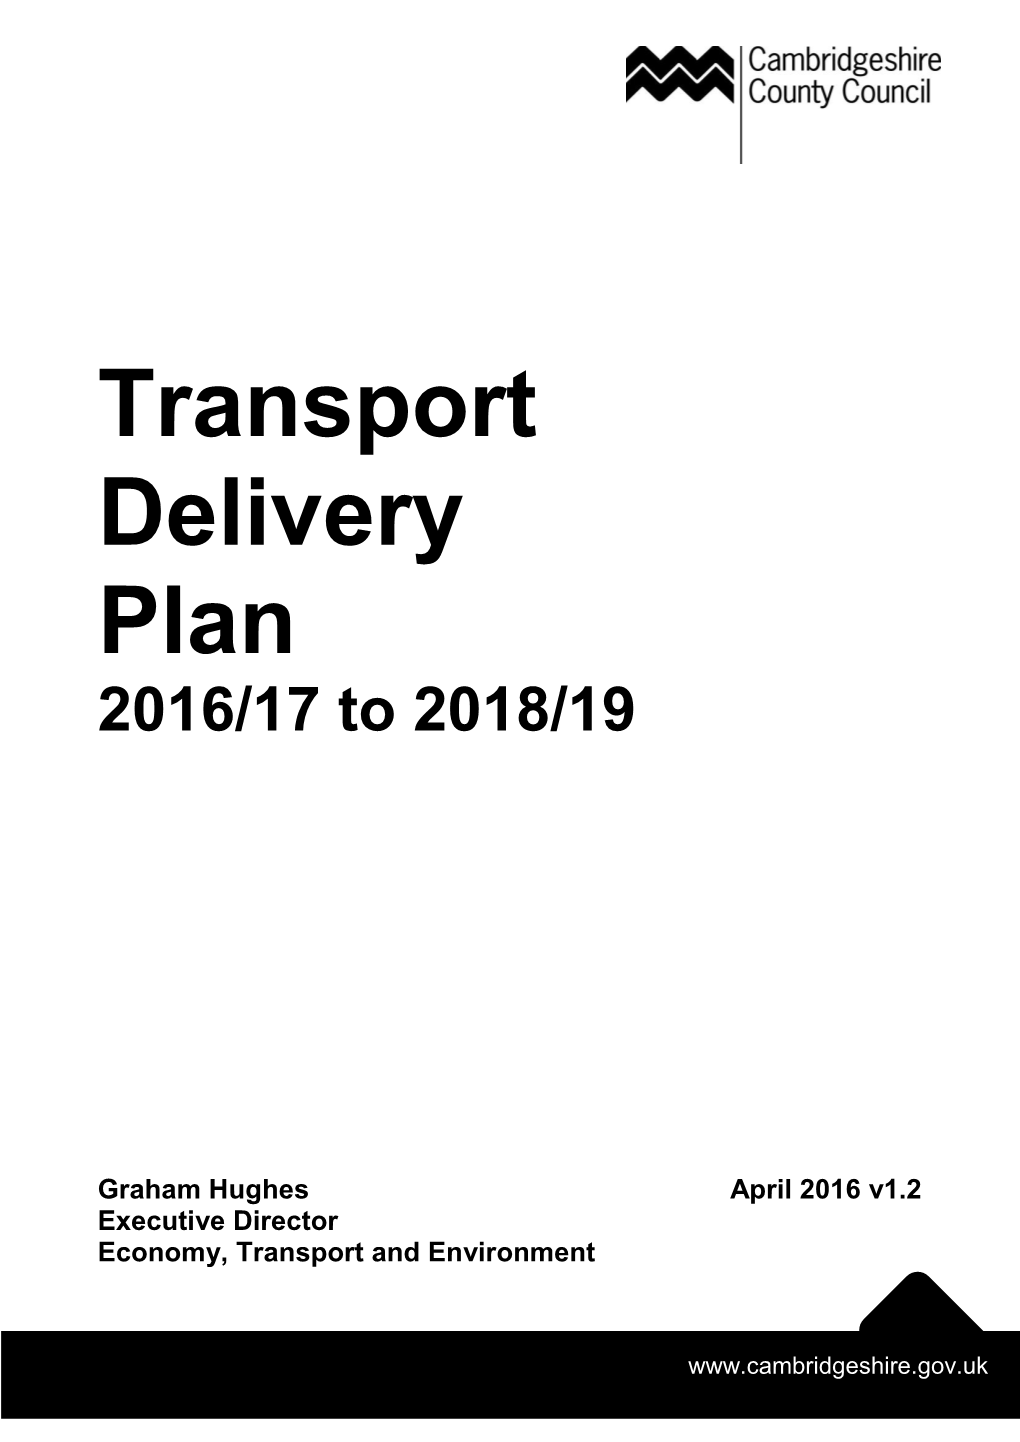 Transport Delivery Plan 2016/17 to 2018/19